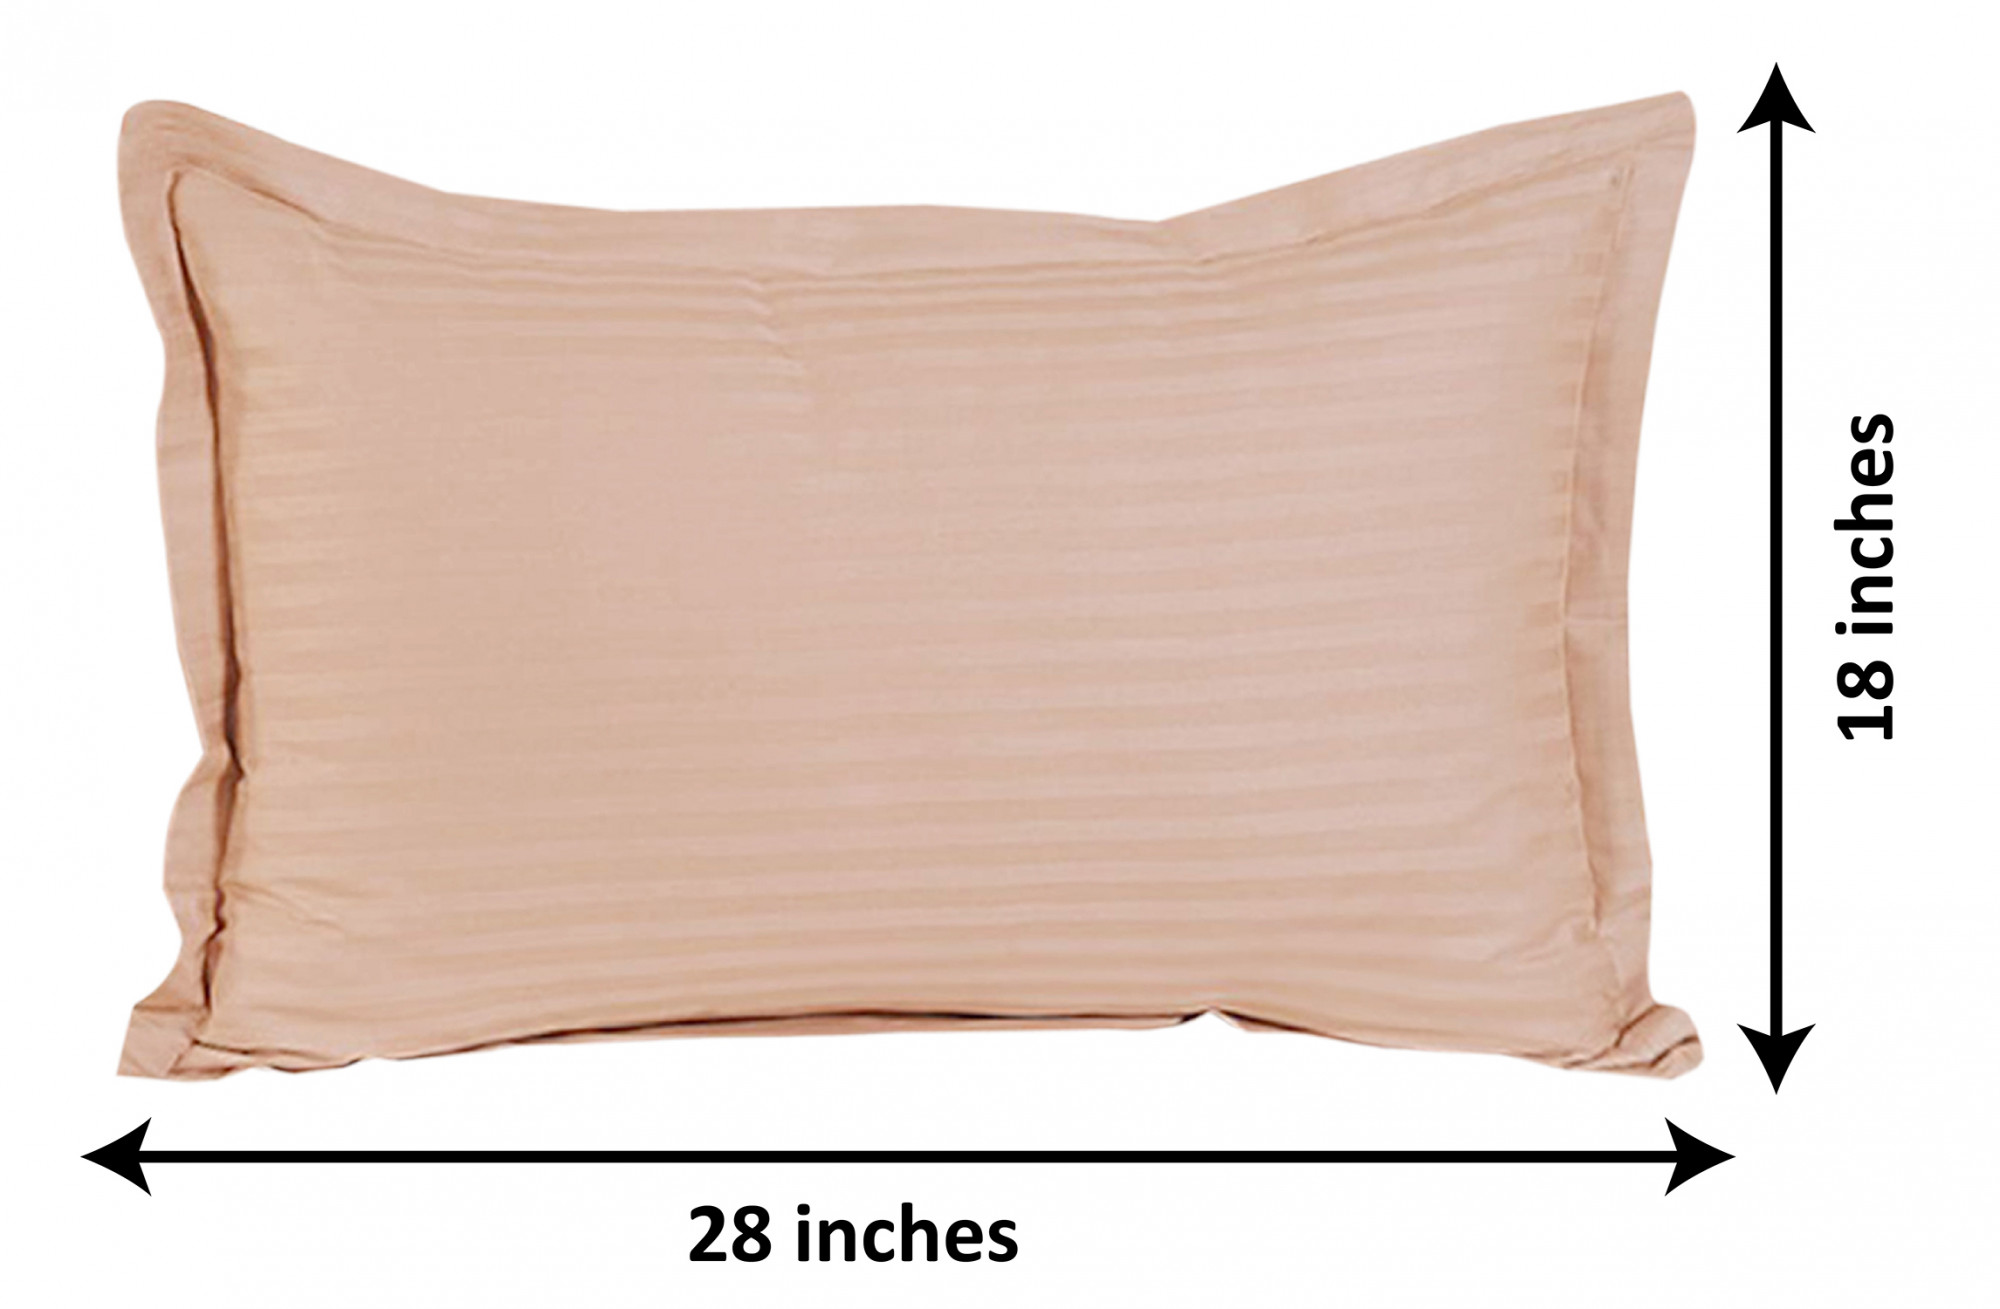 Kuber Industries Lining Design Breathable & Soft Cotton Pillow Cover/Protector/Case- 18x28 Inch,(Peach)-HS43KUBMART26767